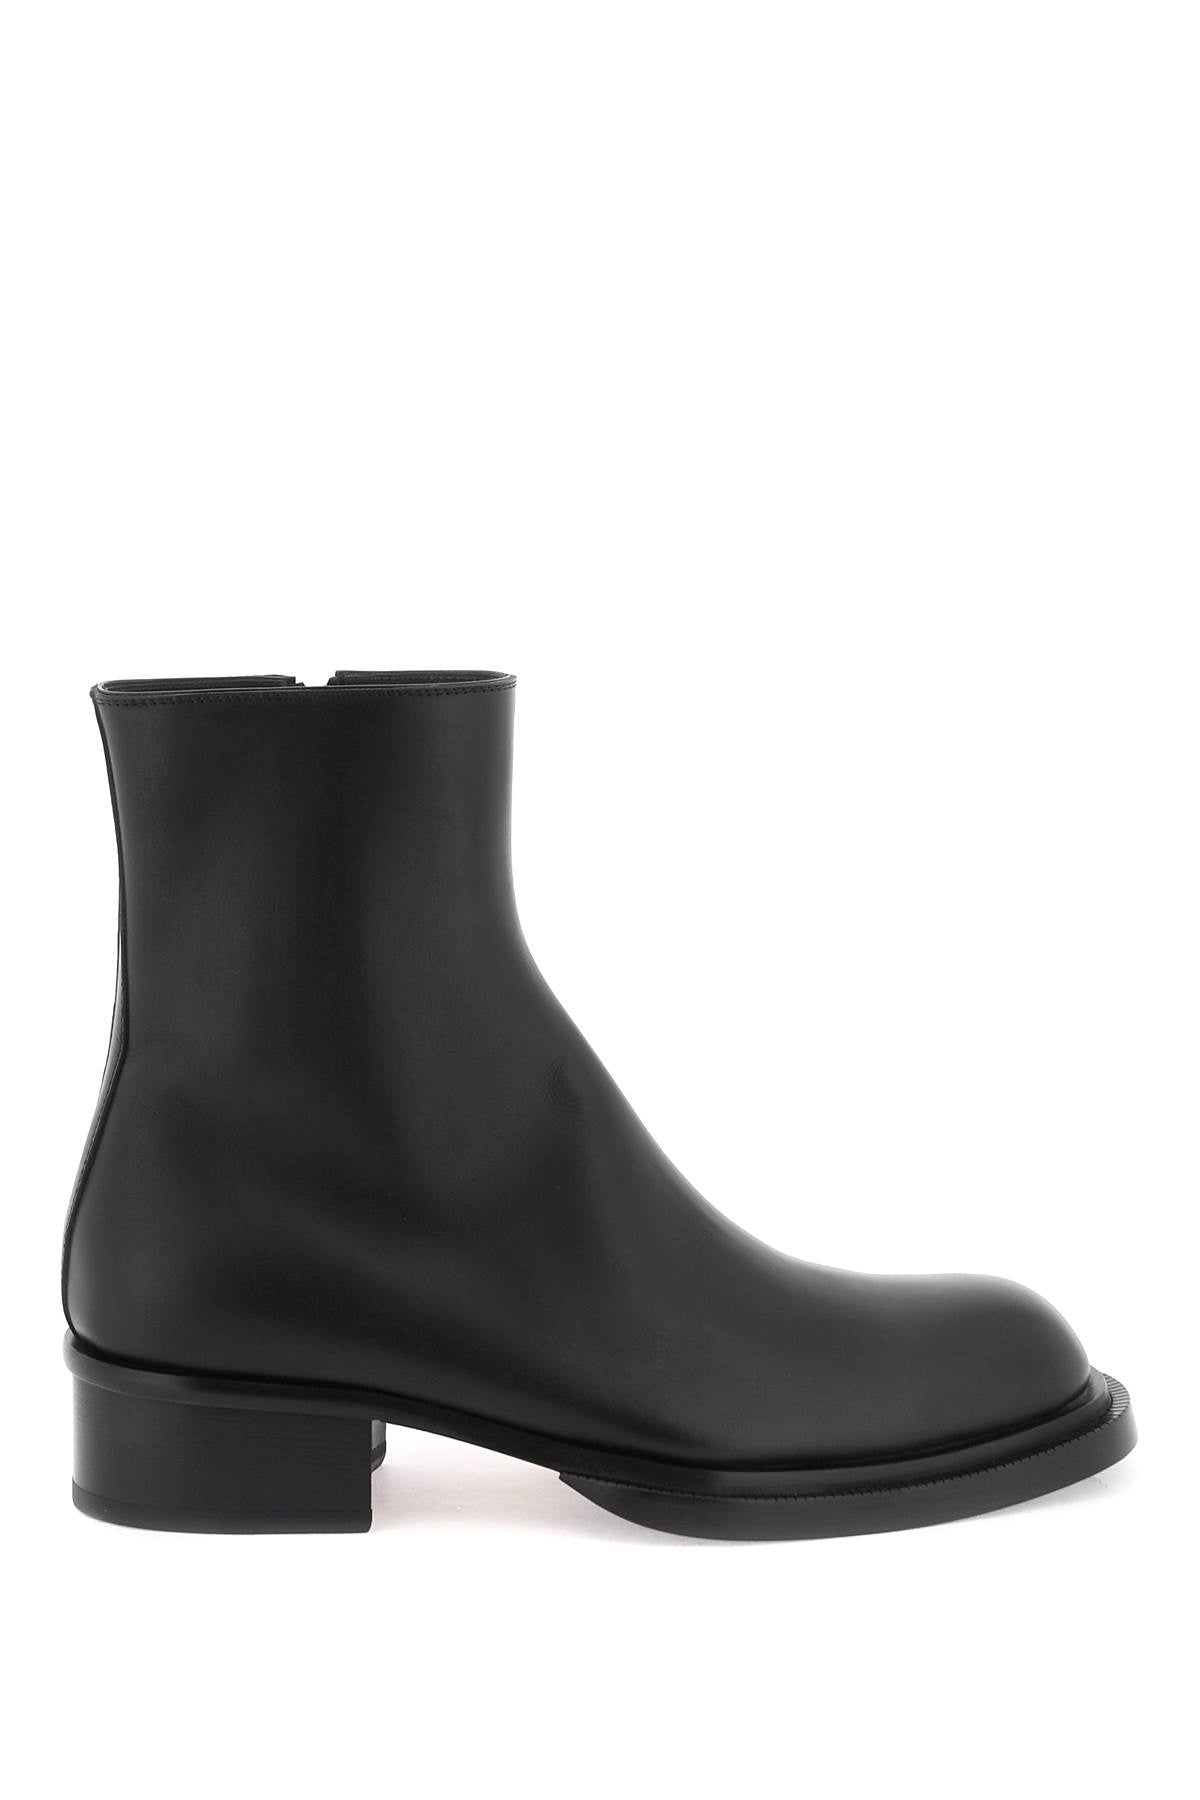 ALEXANDER MCQUEEN Cuban Ankle Boots for Men - Black Leather Double-Layered Sole